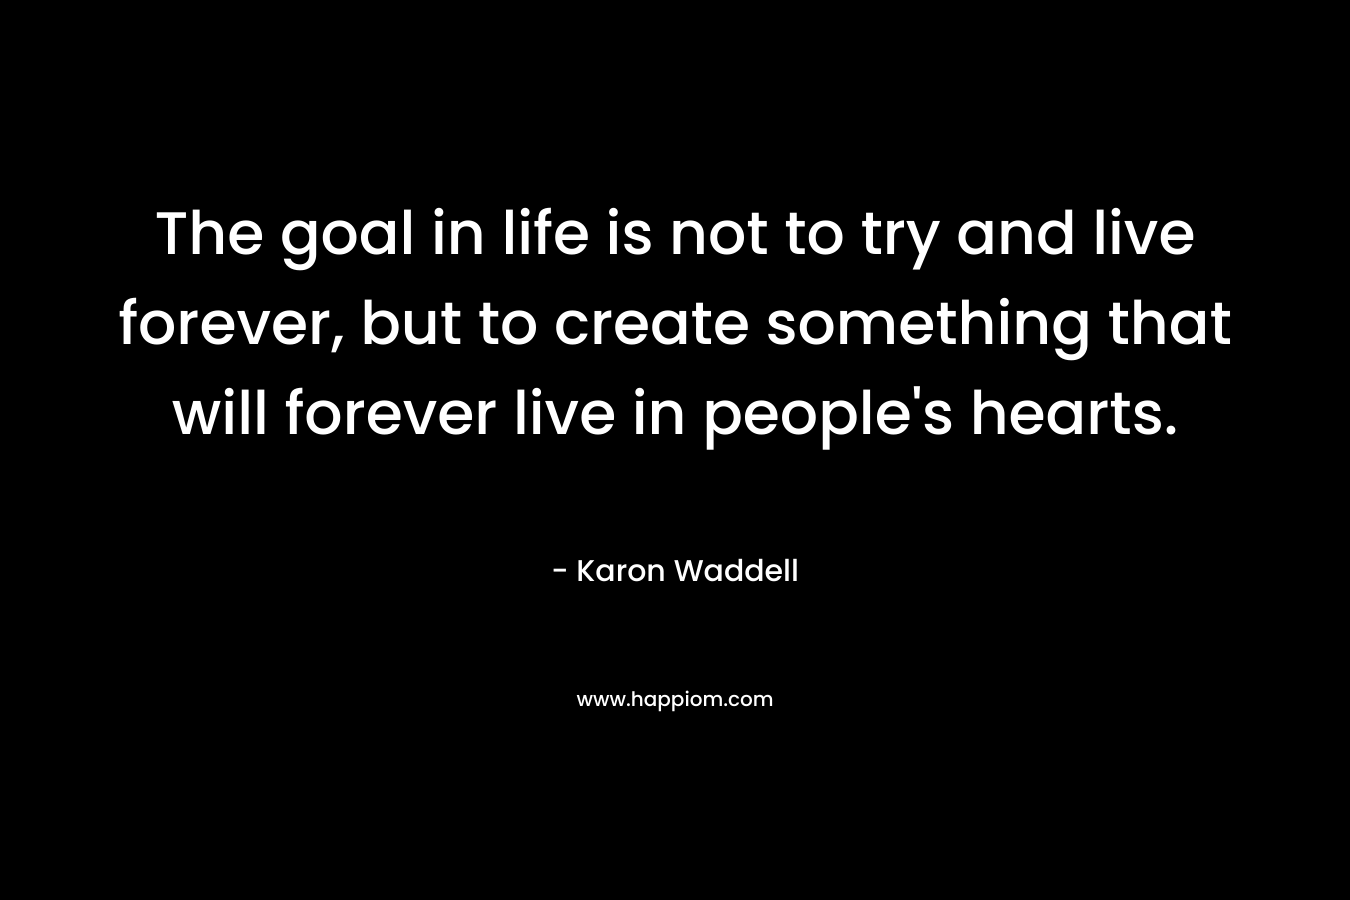 The goal in life is not to try and live forever, but to create something that will forever live in people's hearts.